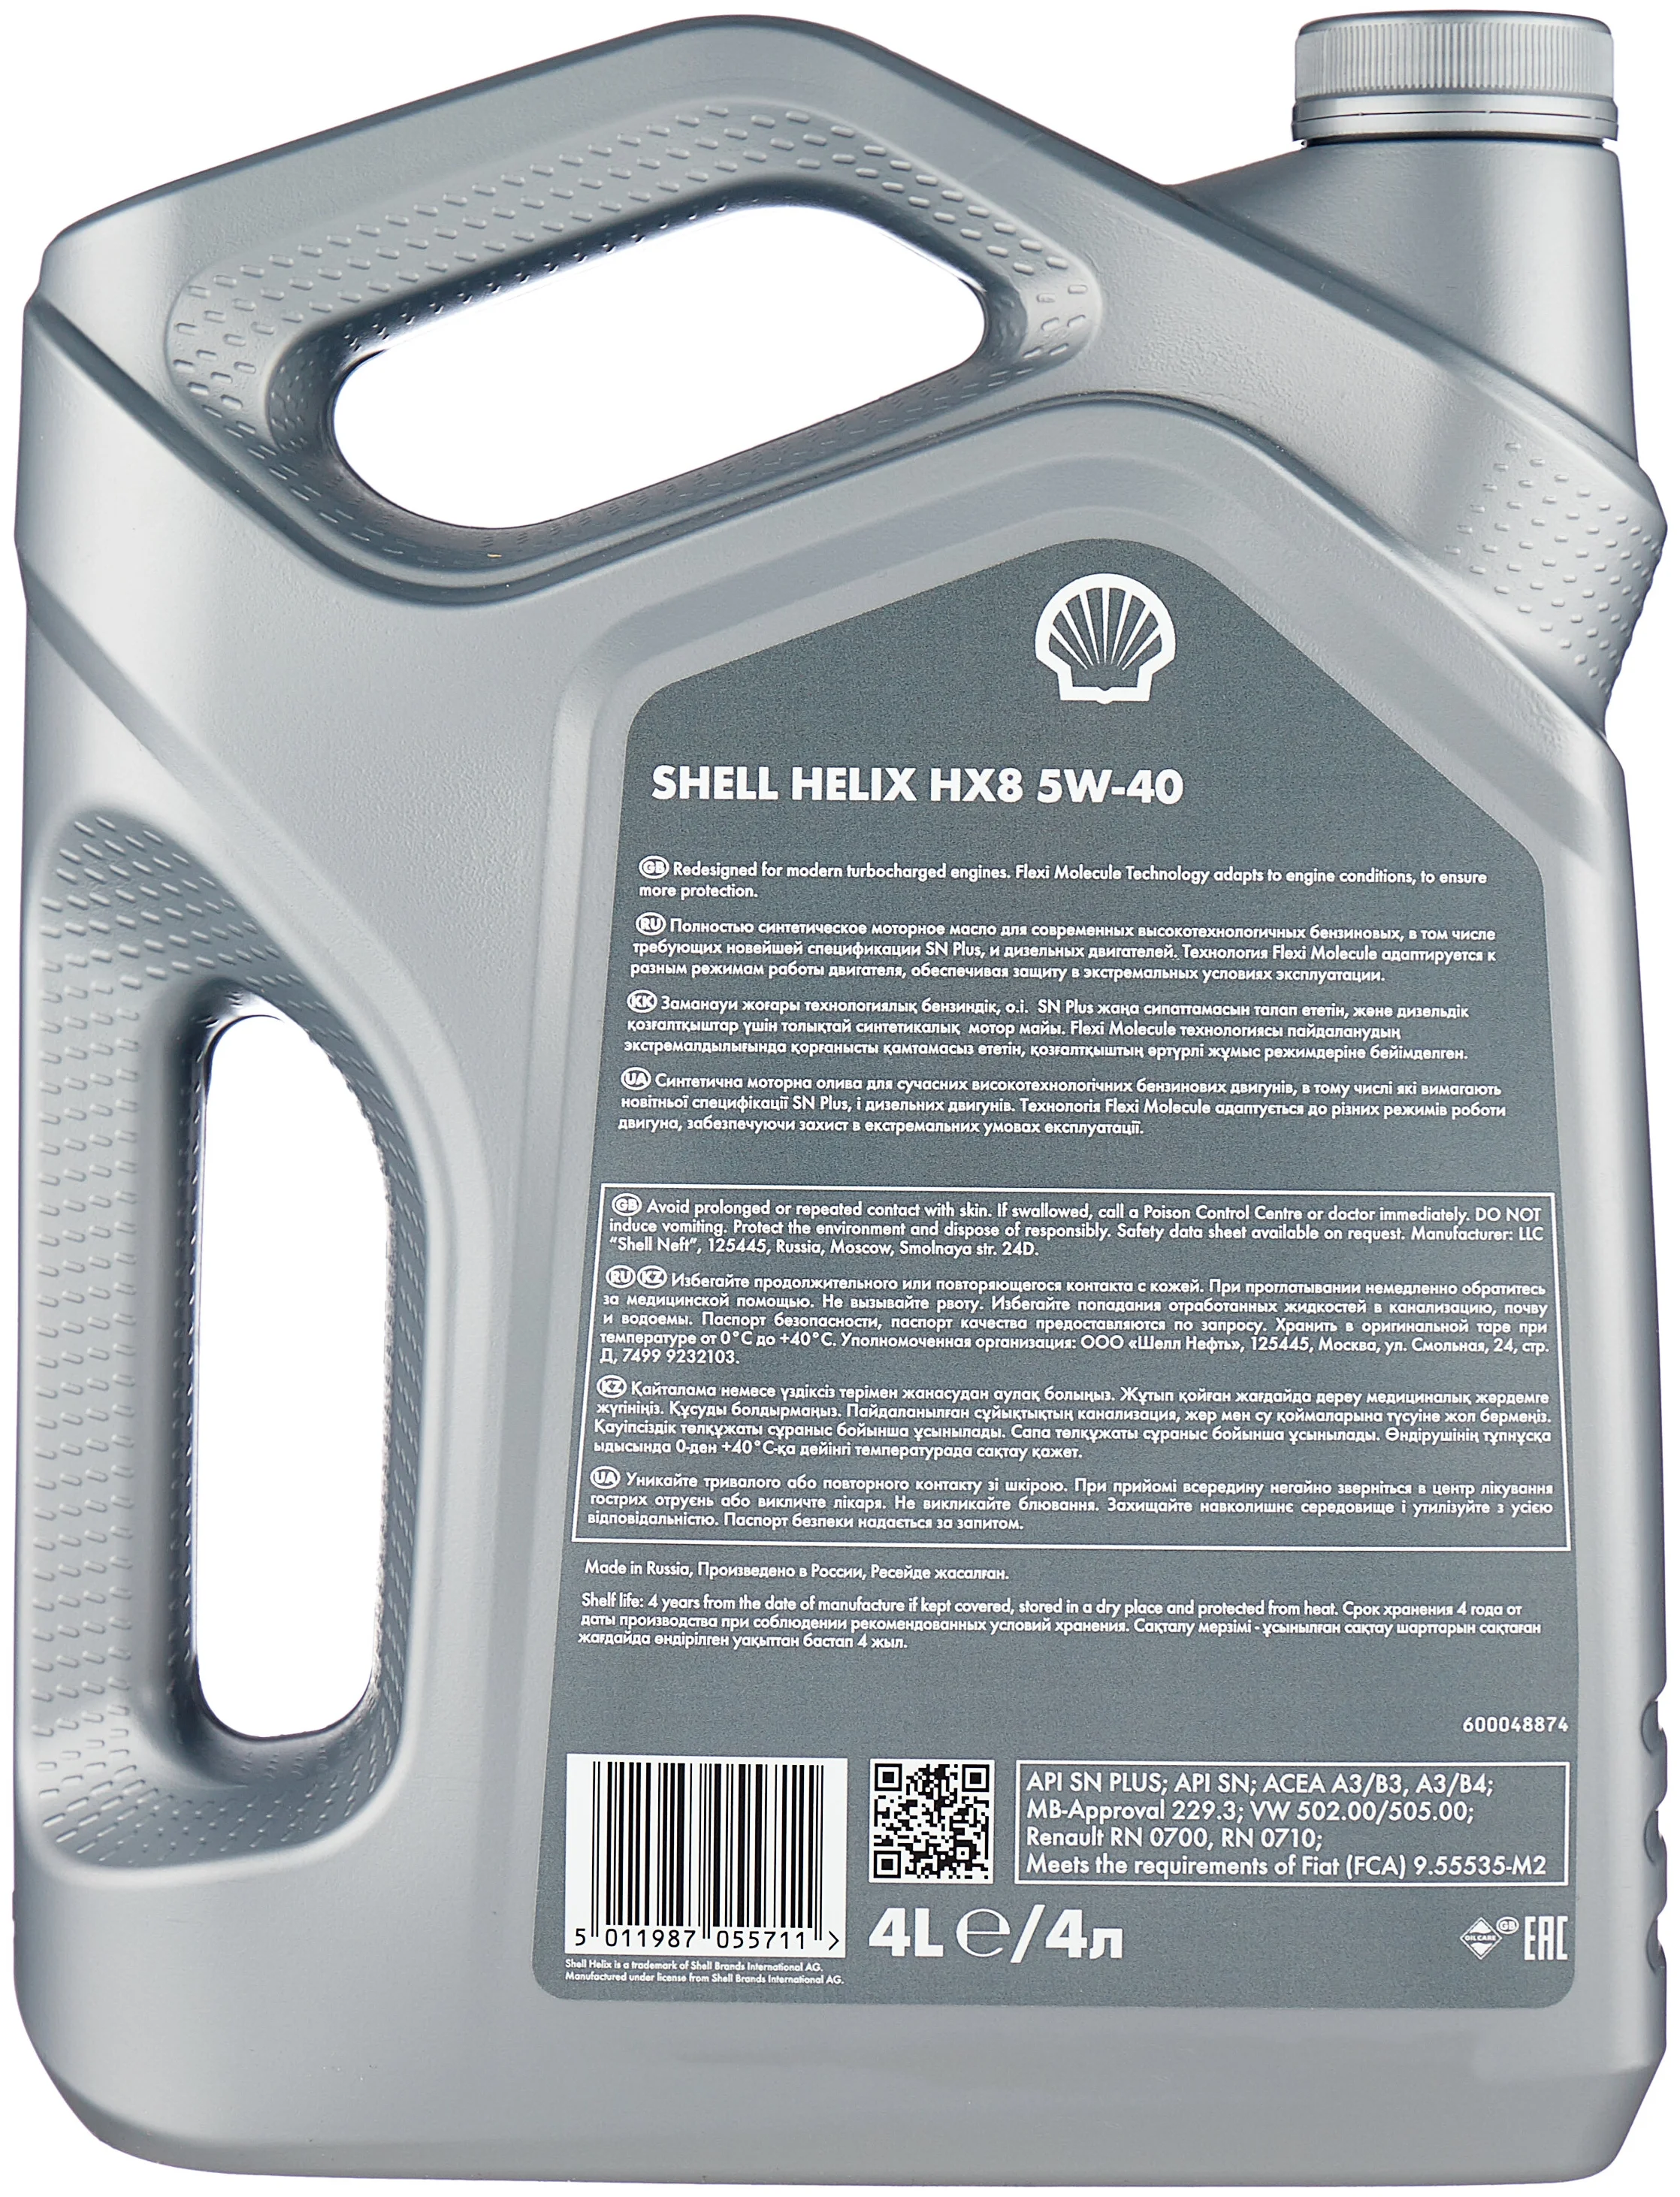 SHELL Helix HX8 Synthetic 5W-40 - класс API SN, SN+